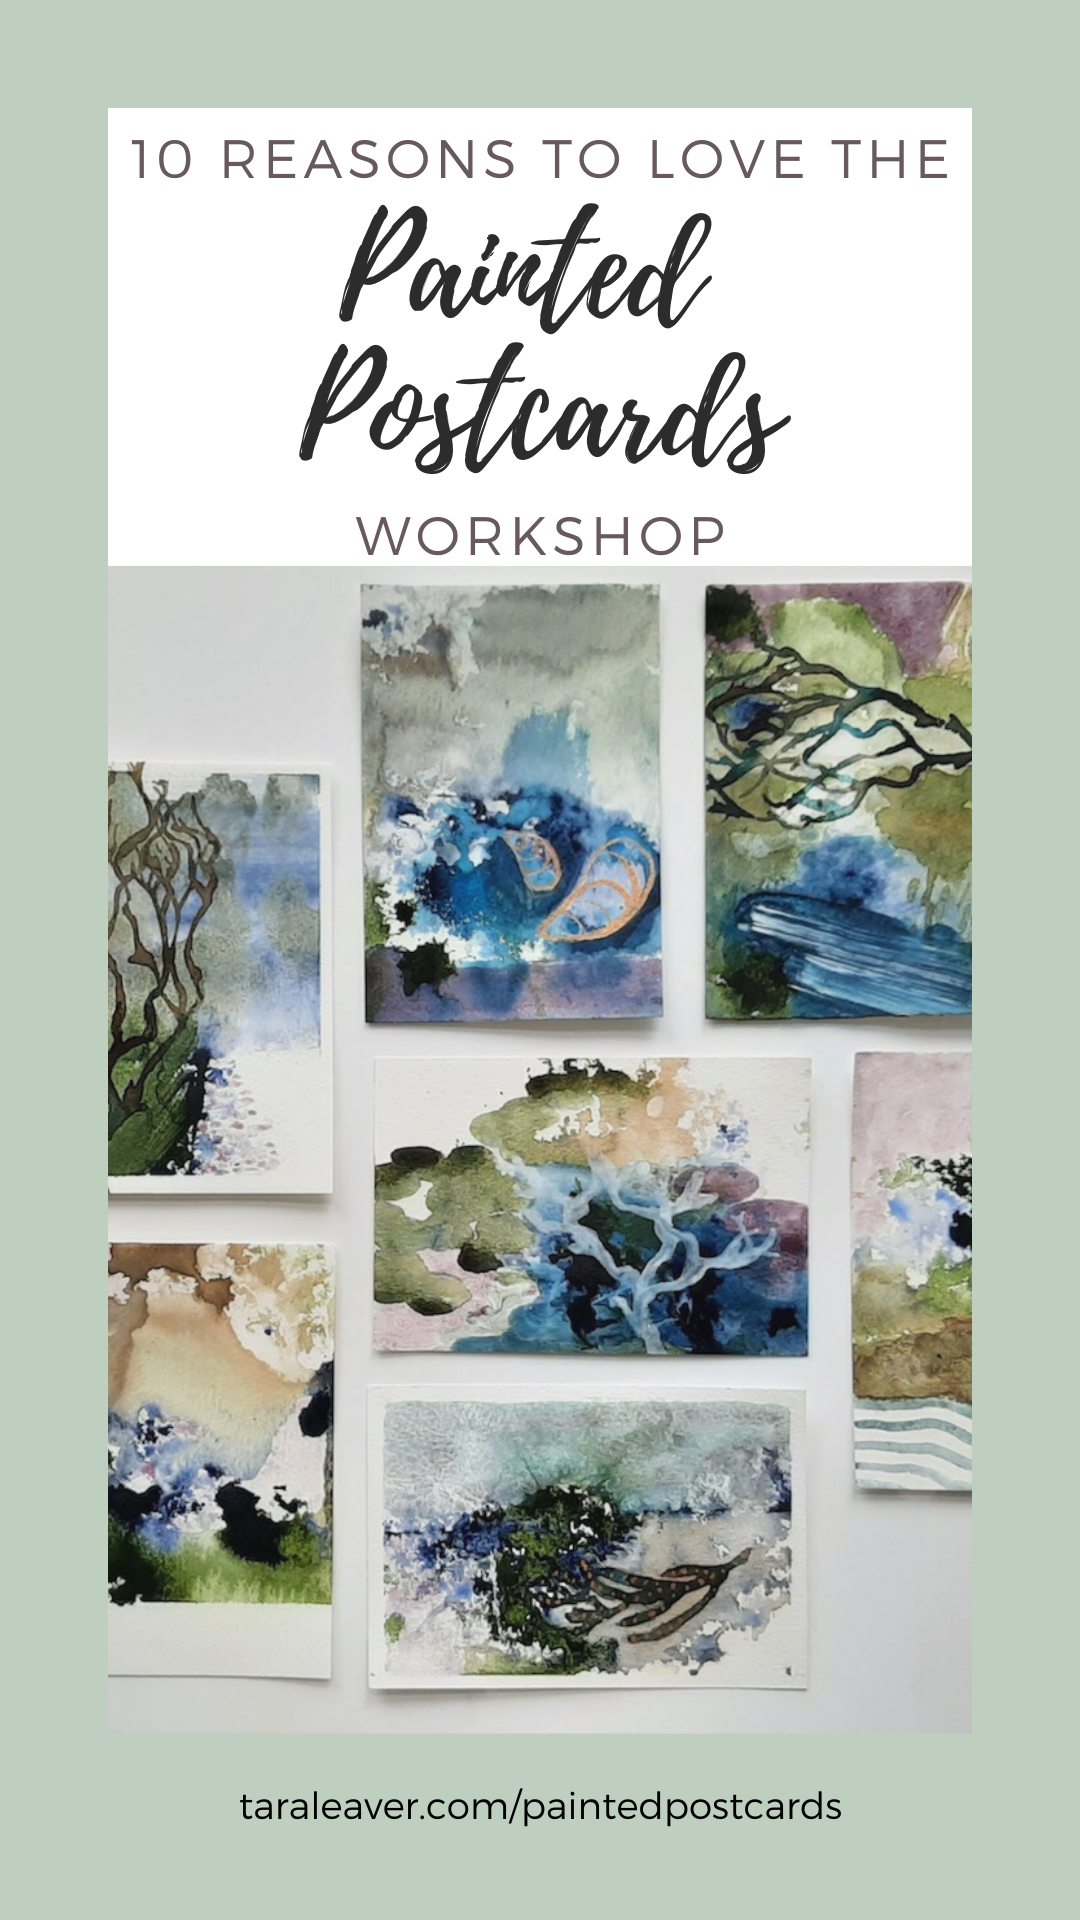 10 reasons to love the Painted Postcards workshop